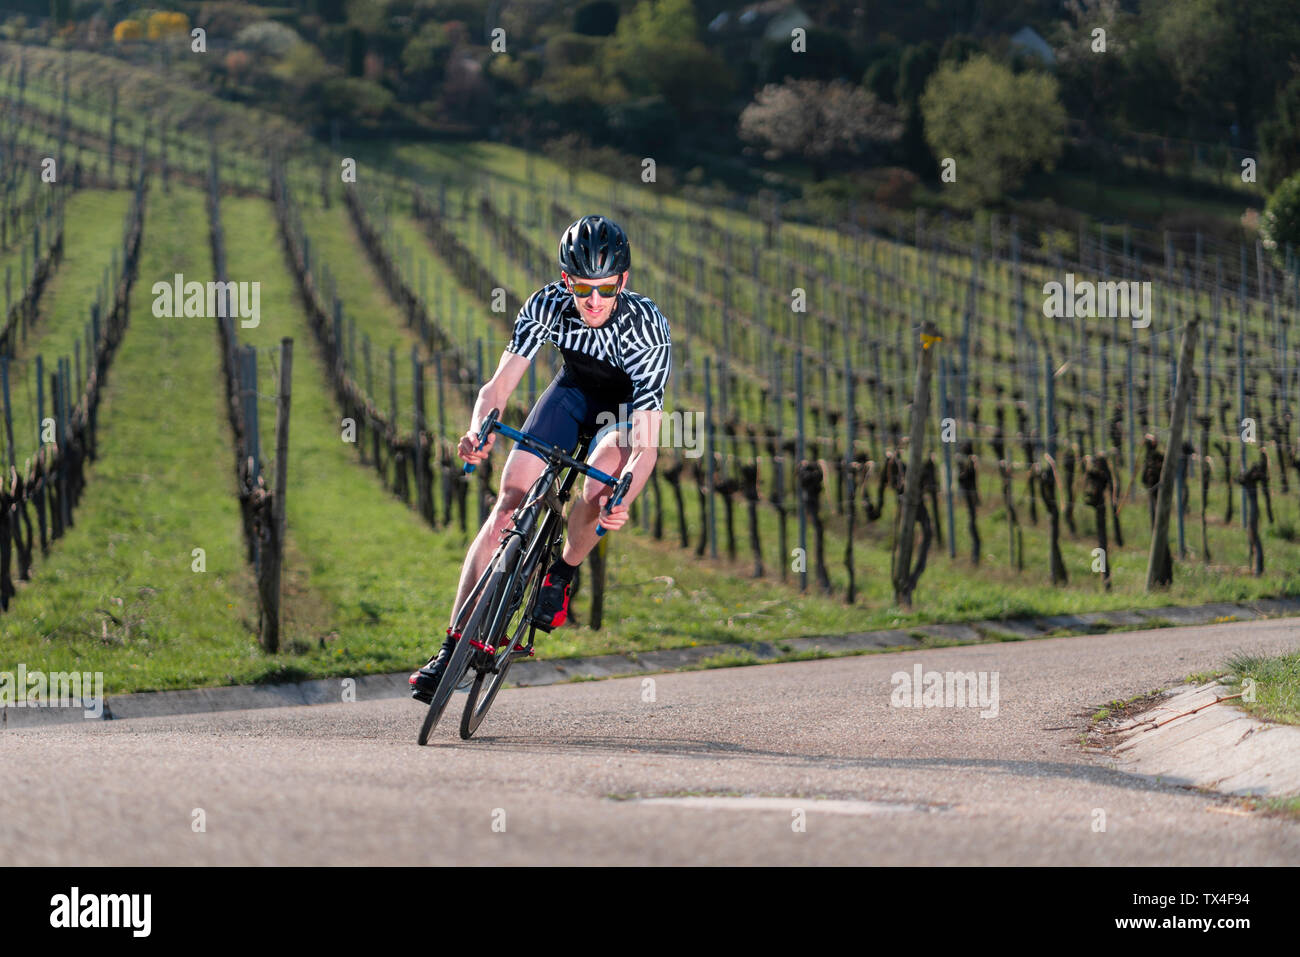 Germany, Baden-Wuerttemberg, Fellbach, man on racing cycle on country road through vineyards Stock Photo